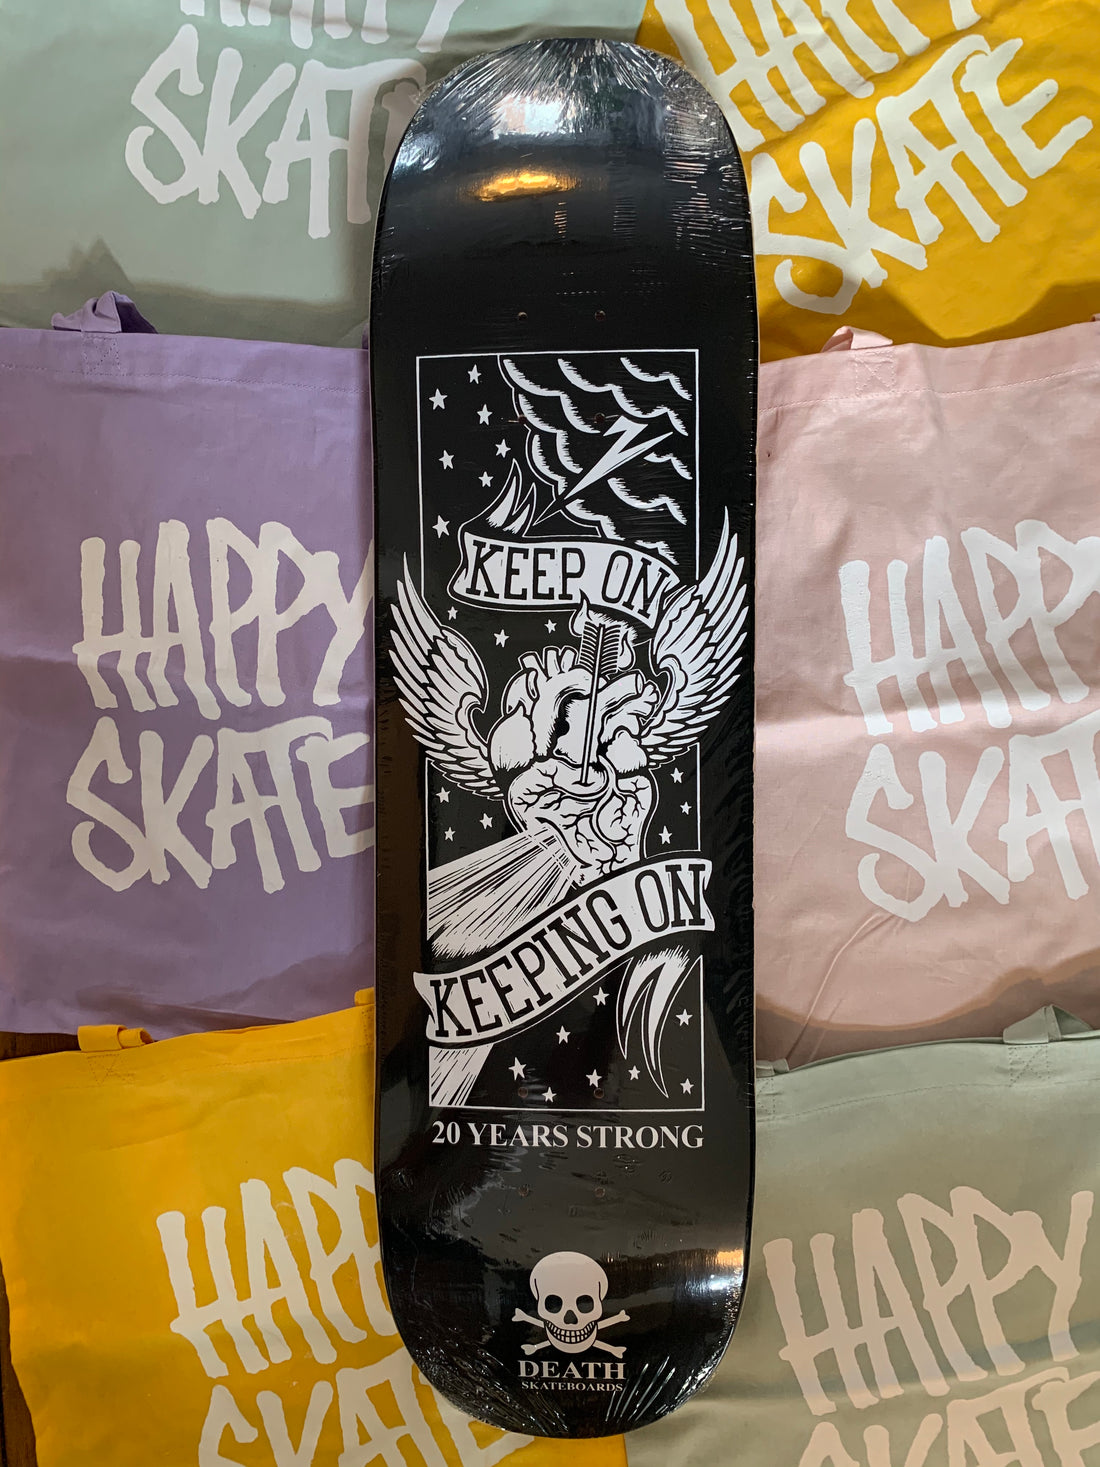 New Death Boards and New Happy Skate Totes